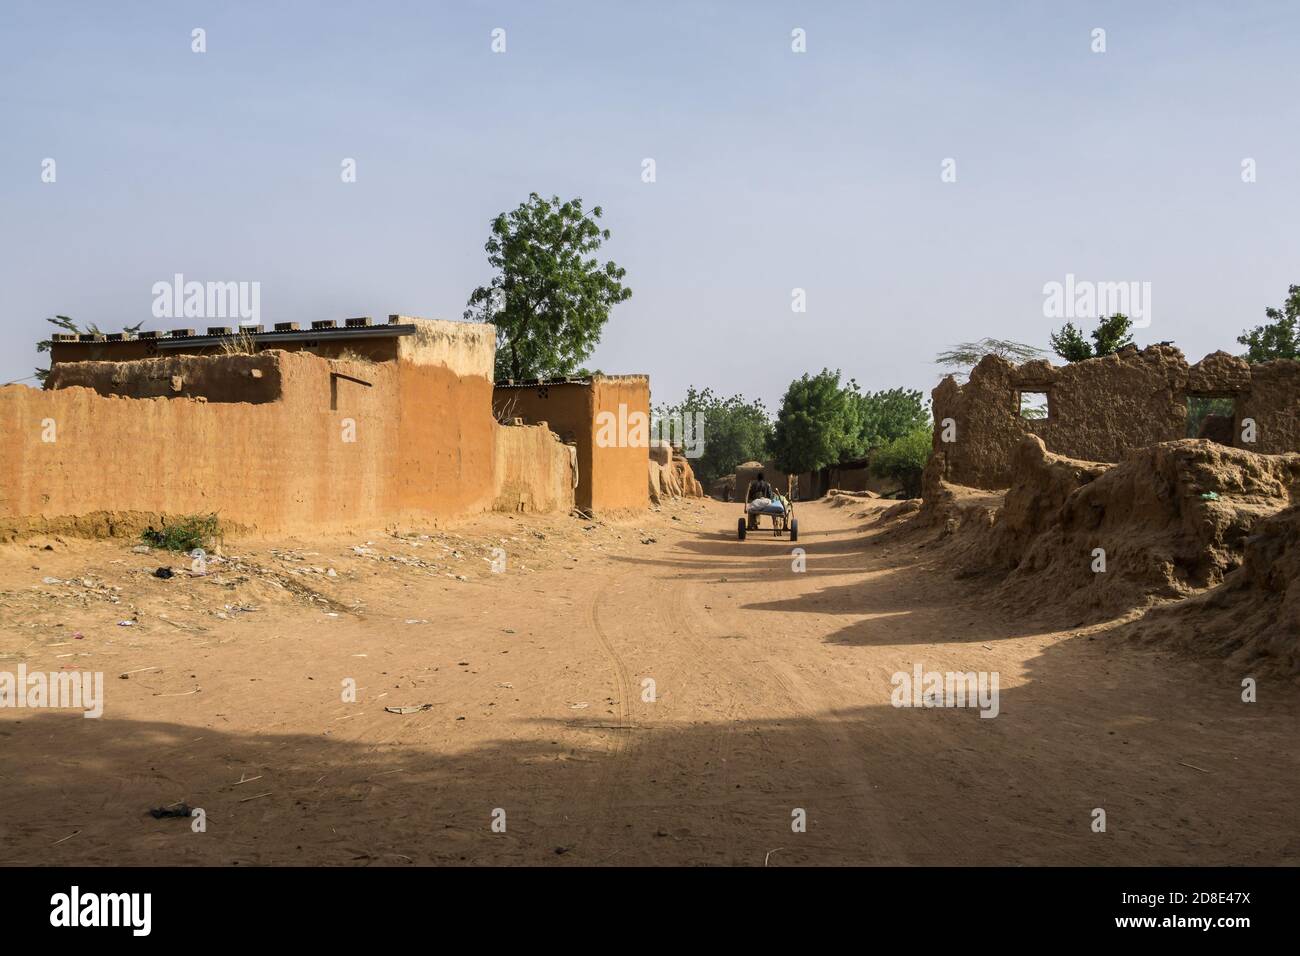 Village life in rural Mali, West Africa Stock Photo